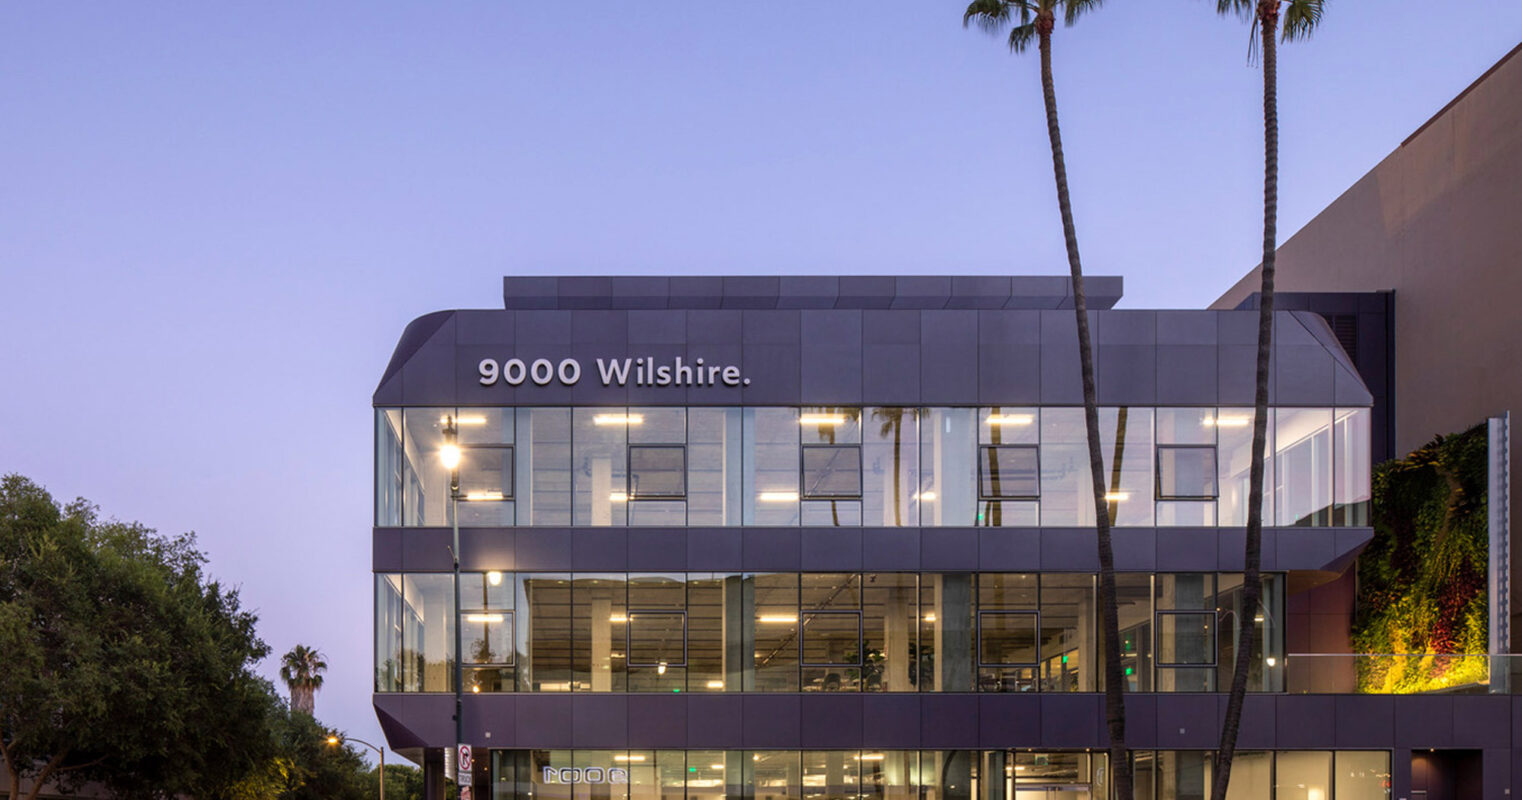 Modern three-story commercial building at dusk with extensive use of glass and geometric lines, illuminated interior showcasing a sleek, minimalist design, flanked by tall palm trees against a twilight sky. Address "9000 Wilshire" prominently displayed.